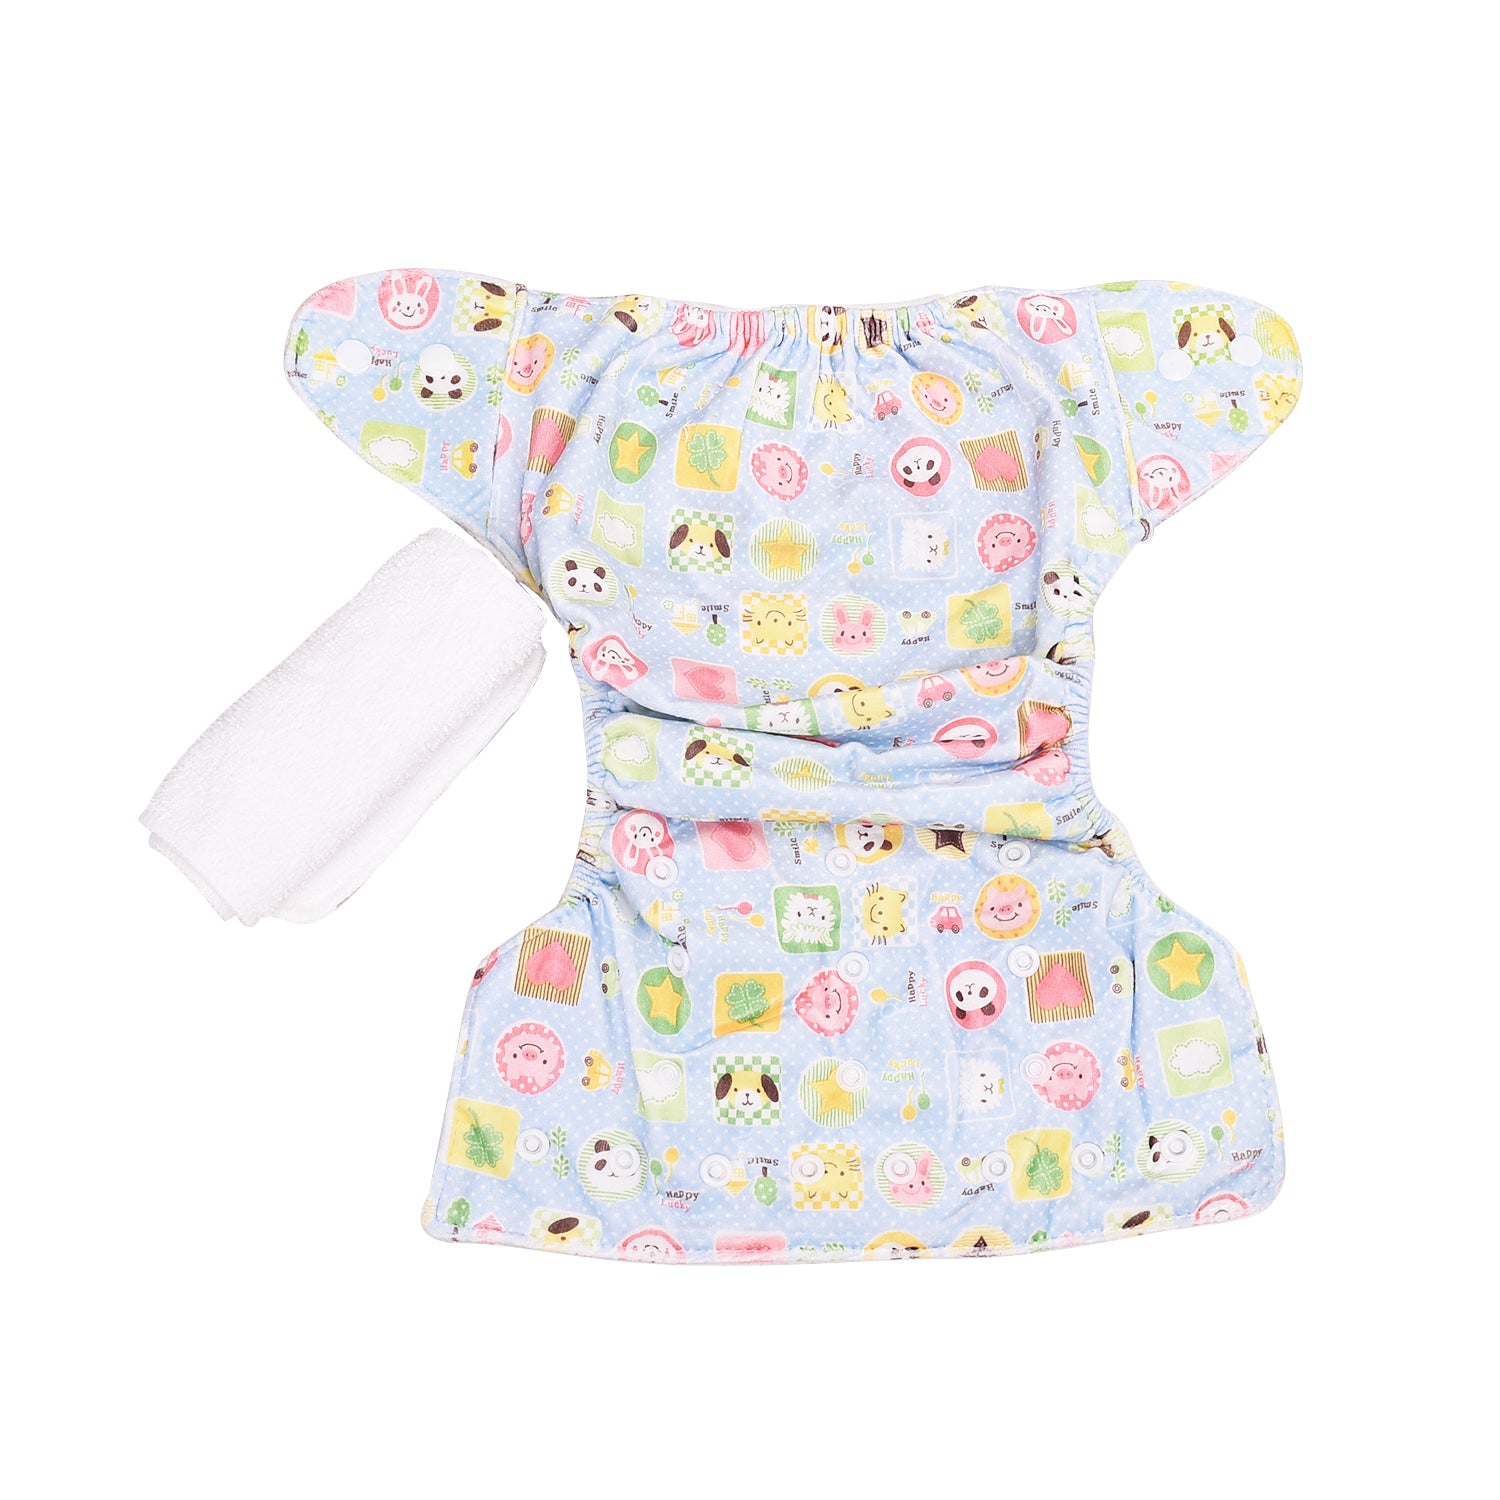 Baby Reusable Cotton Pocket Diapers- Pack of 3 and 3 Inserts - Size Adjustable -0-24 Months-Mix Designs